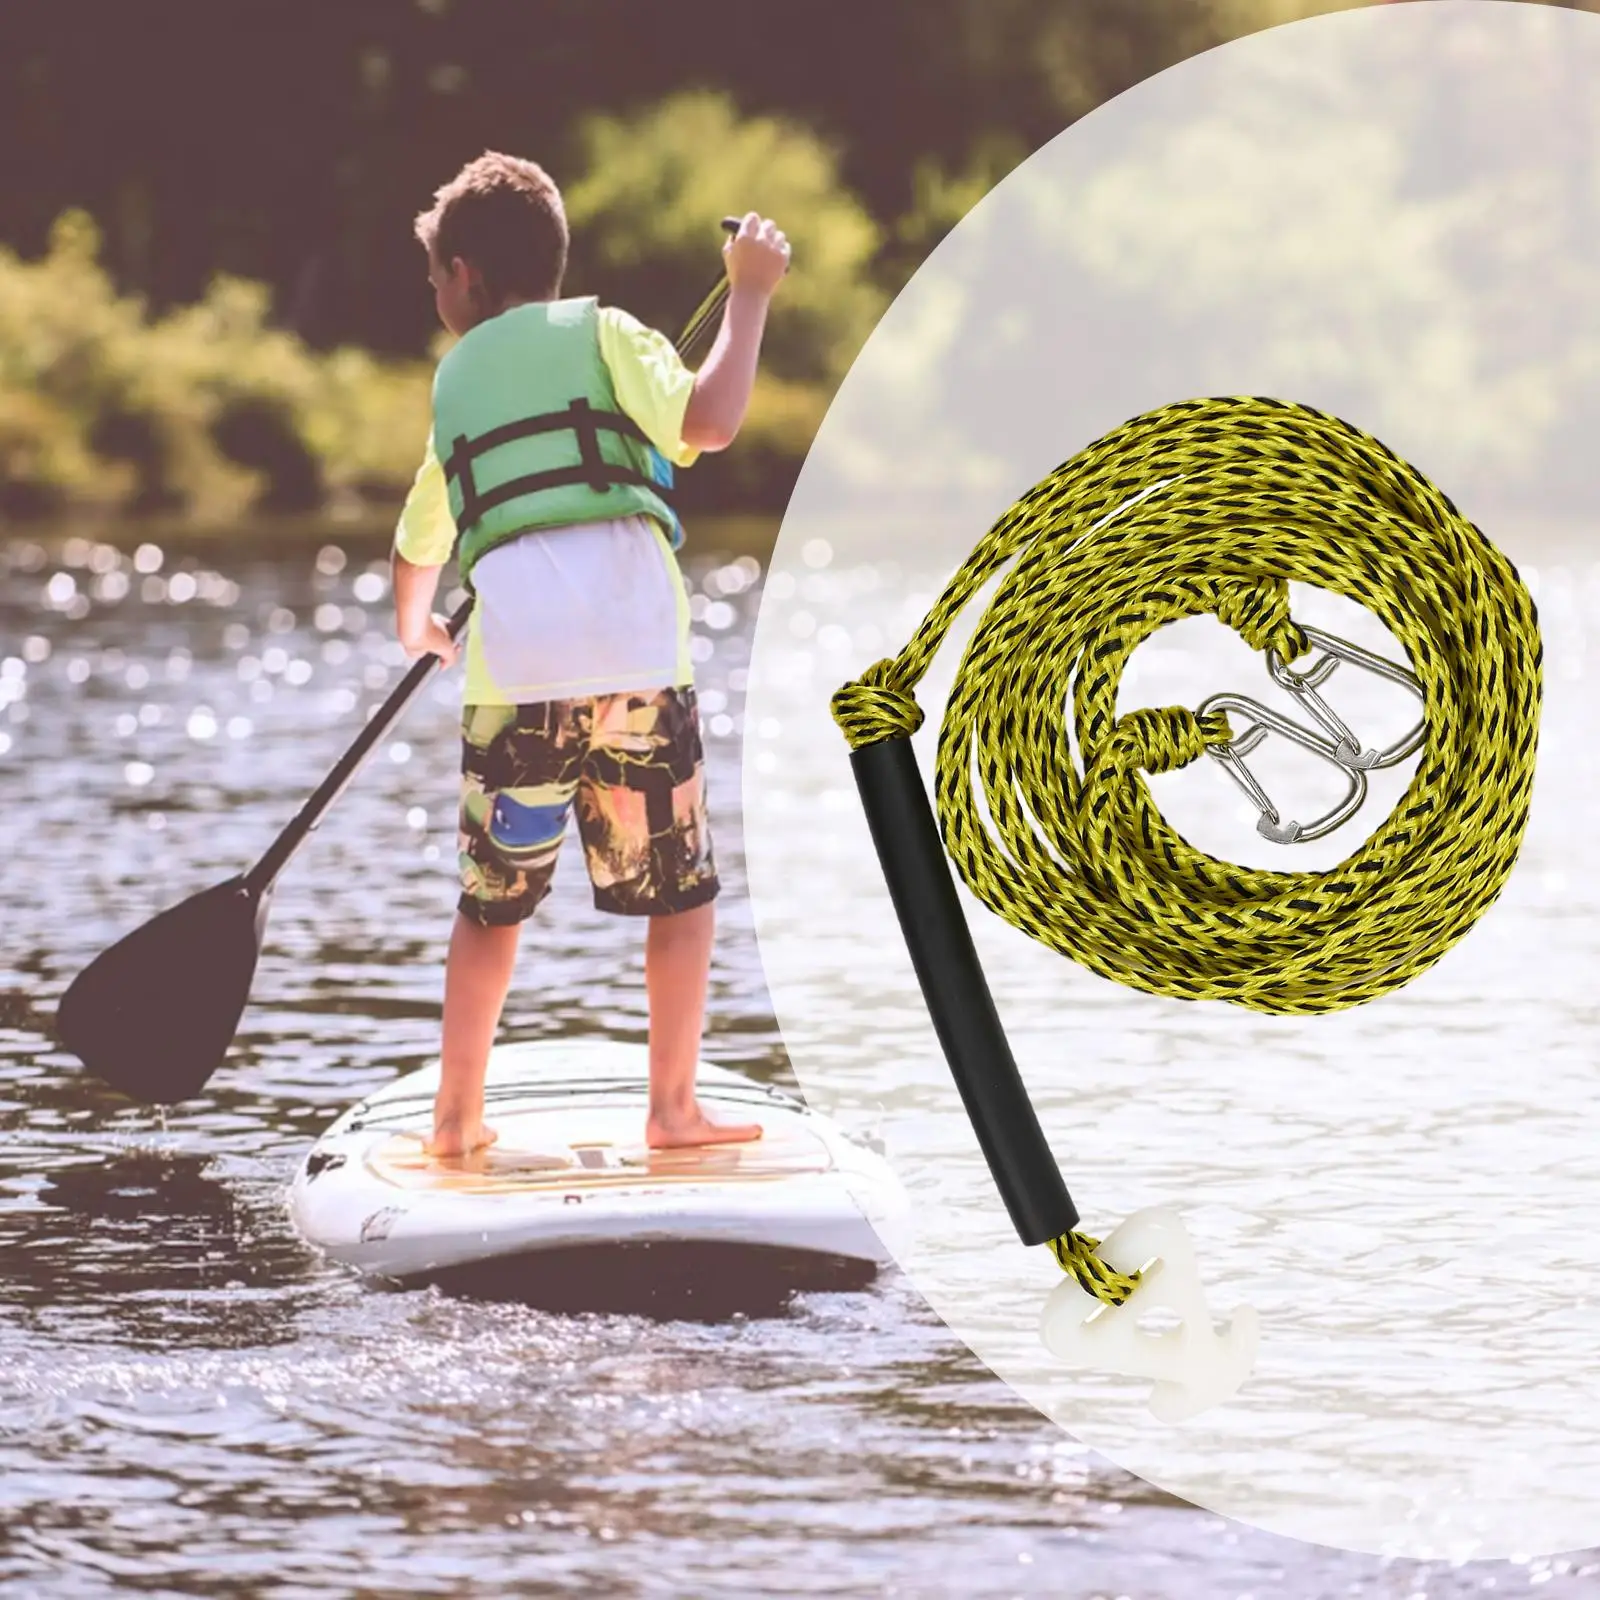 Pulley Tow Harness Watersports Rope 17ft Waakeboarding Tubing Wake Boarding Pulling Rope Water Sport Lines Accessories